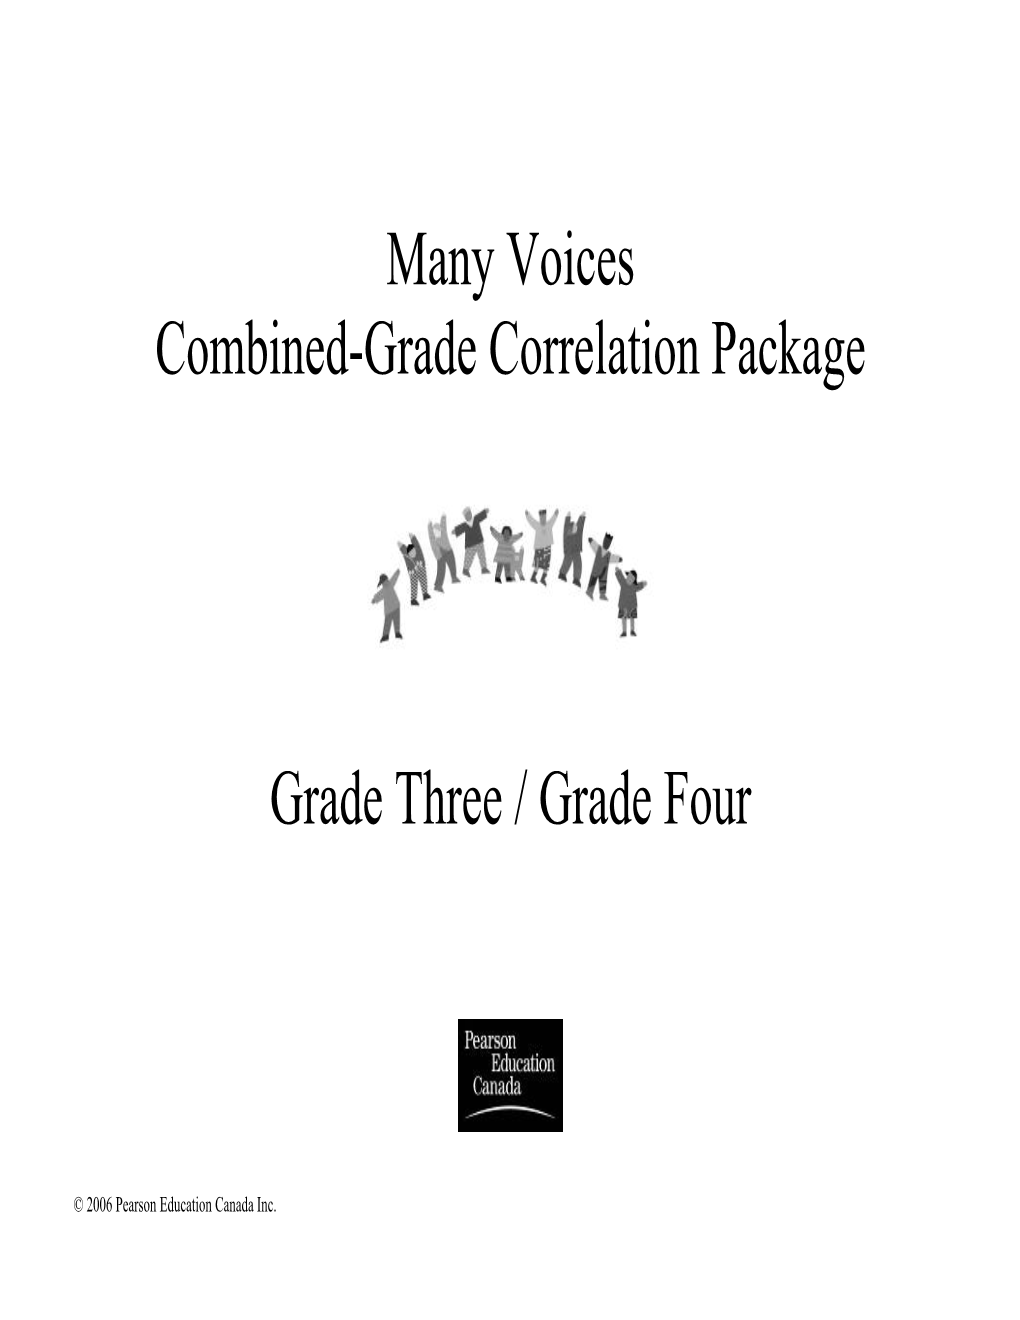 Many Voices Combined-Grade Correlation Package